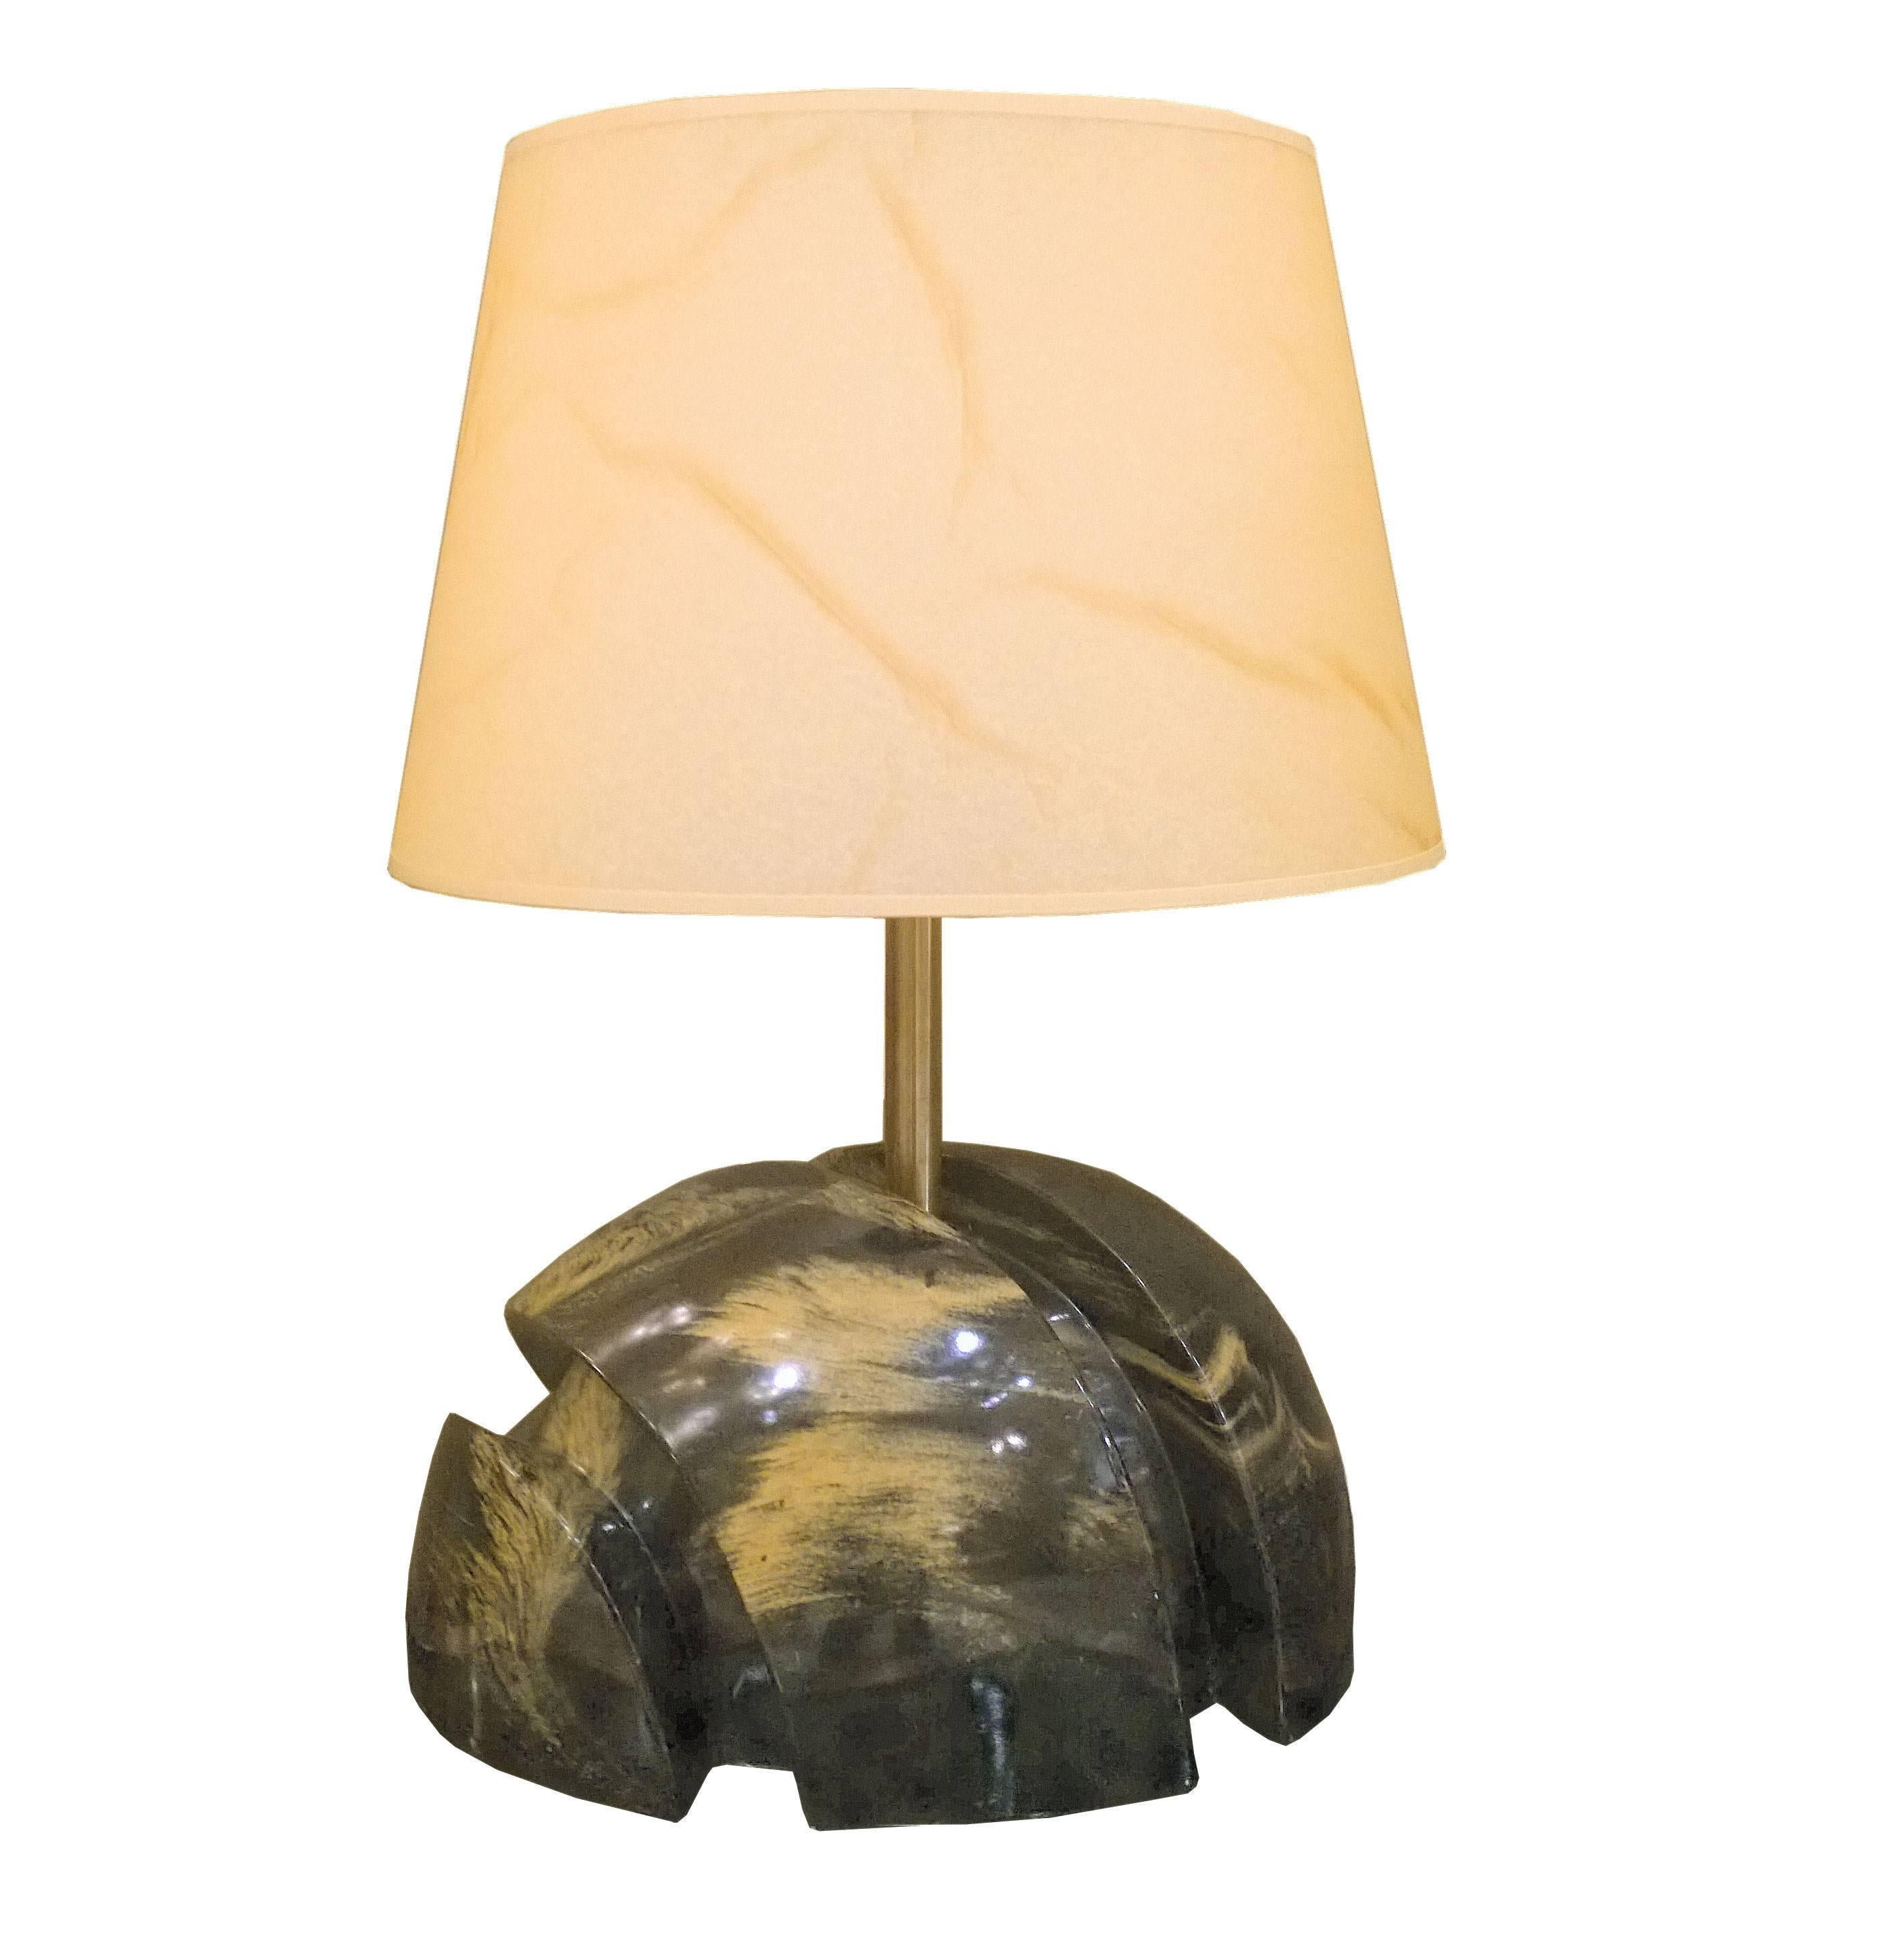 Pair of marble lamps from France.